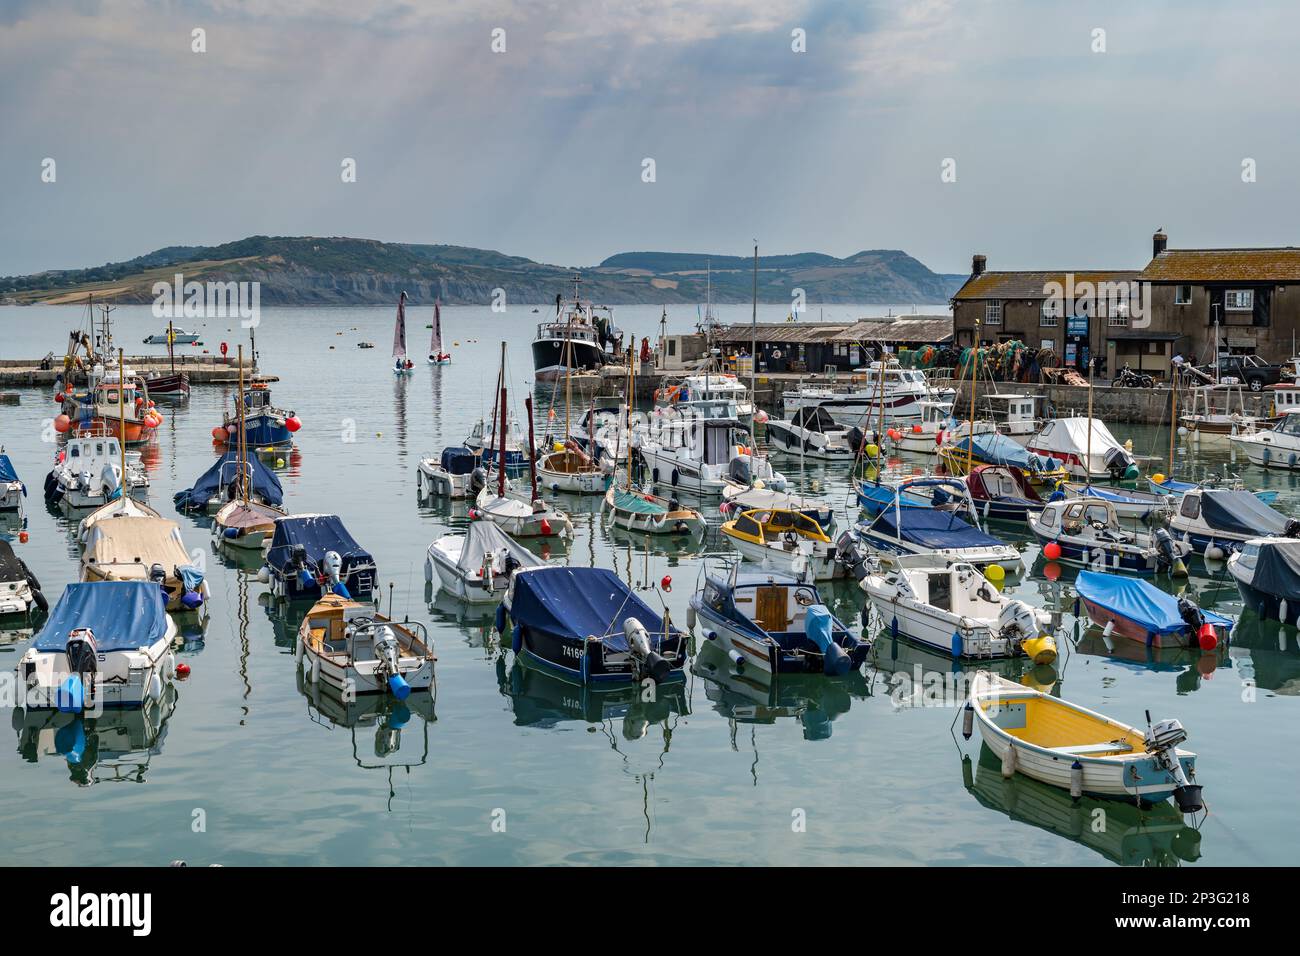 Sailing, rigid hulled and motor boats moored in harbour, Lyme Regis, Dorset, England, UK Stock Photo